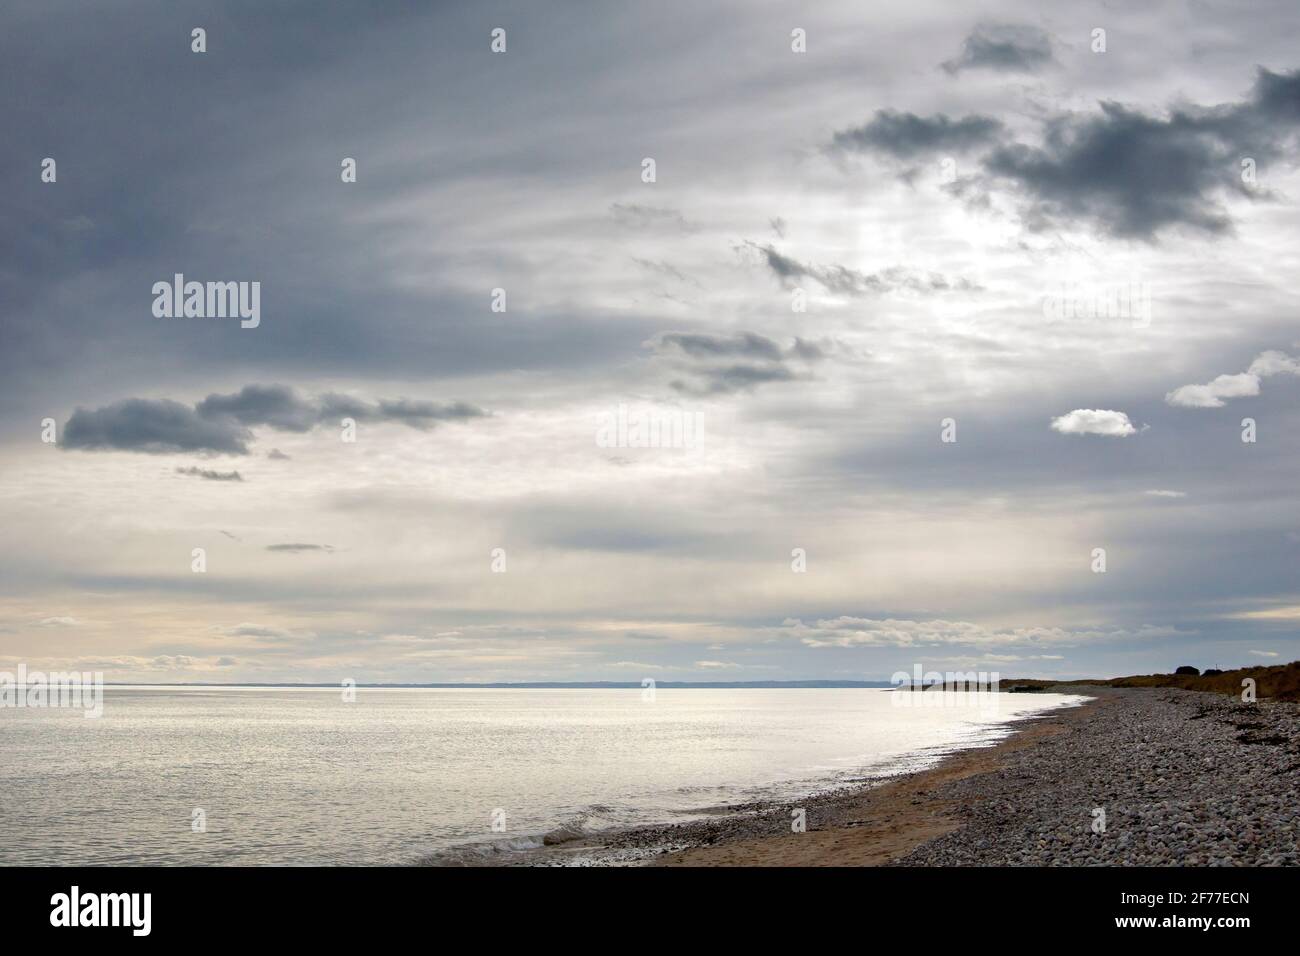 The beach at Arbroath on an overcast day, the cloud thin enough to allow the sunlight through creating a rather ethereal light in the image. Stock Photo